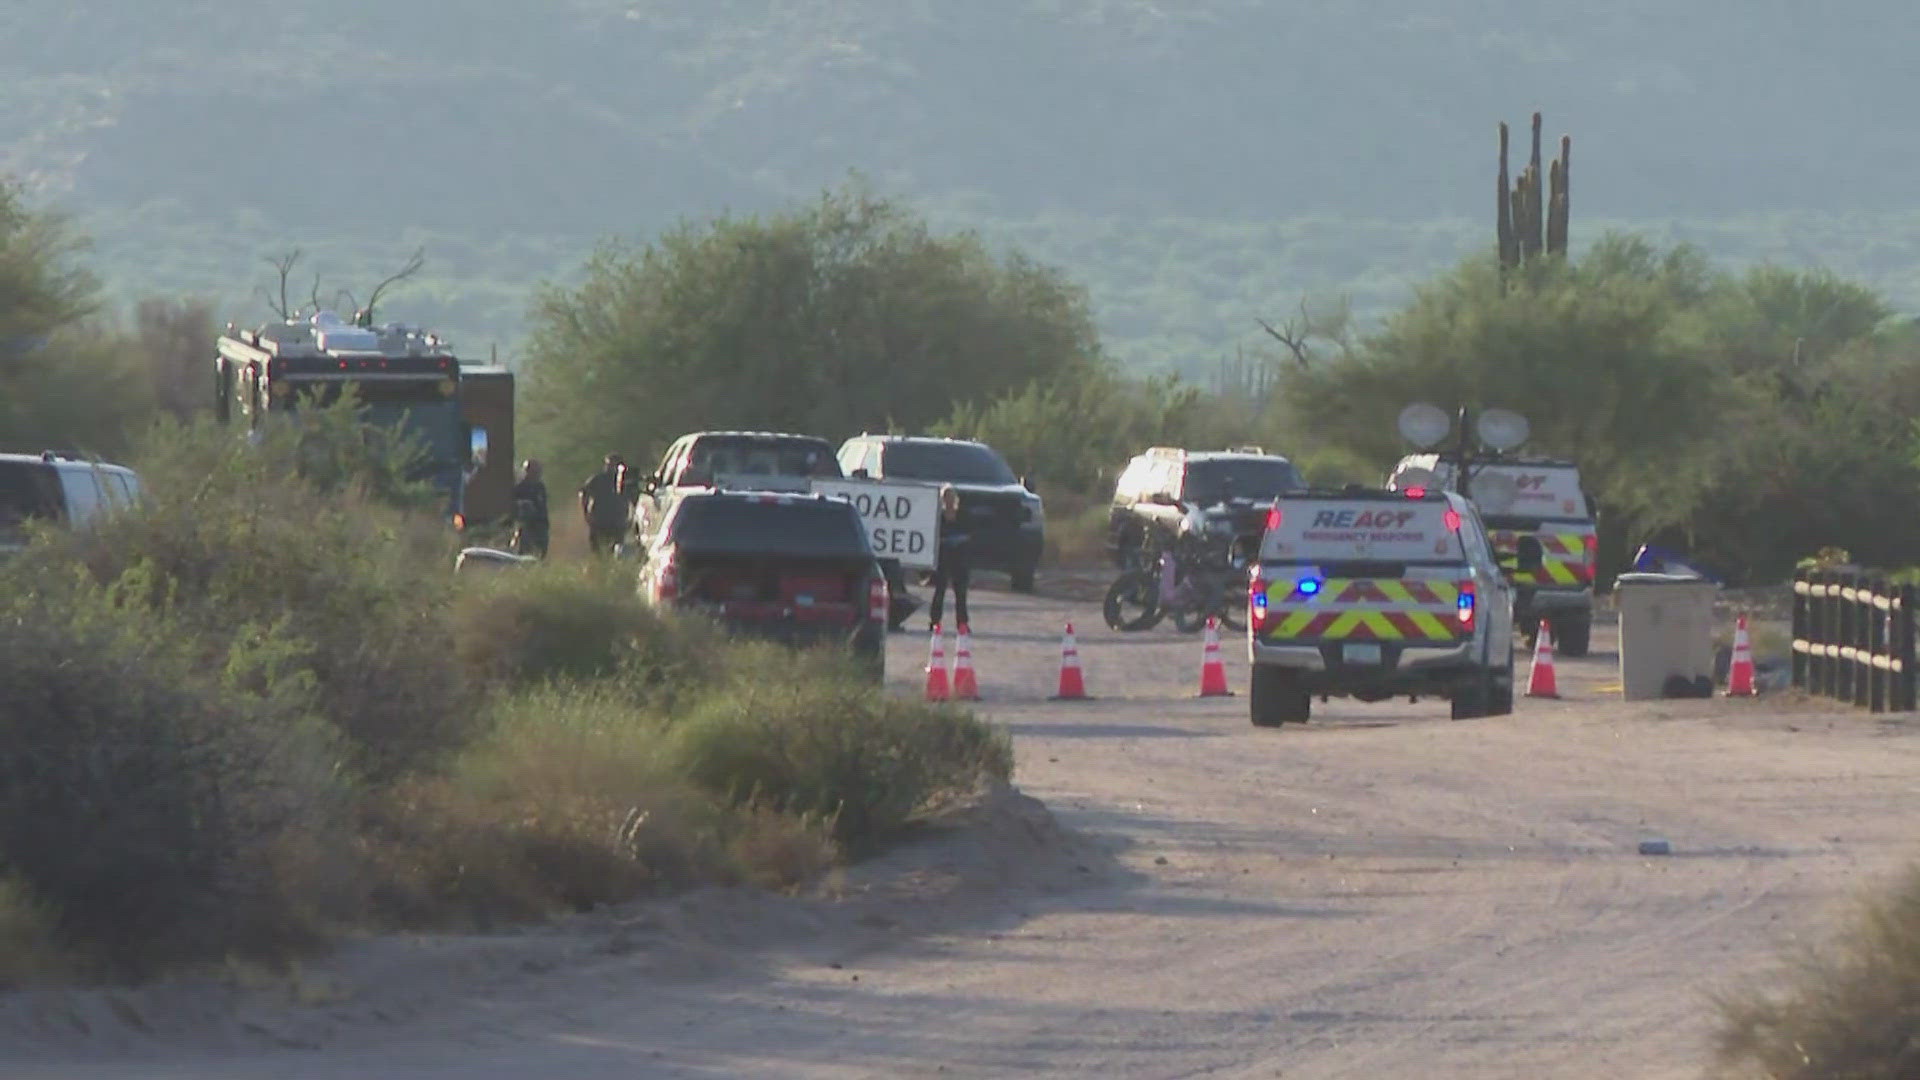 A person is dead after reports of a shooting in Rio Verde, the Maricopa County Sheriff's Office said.